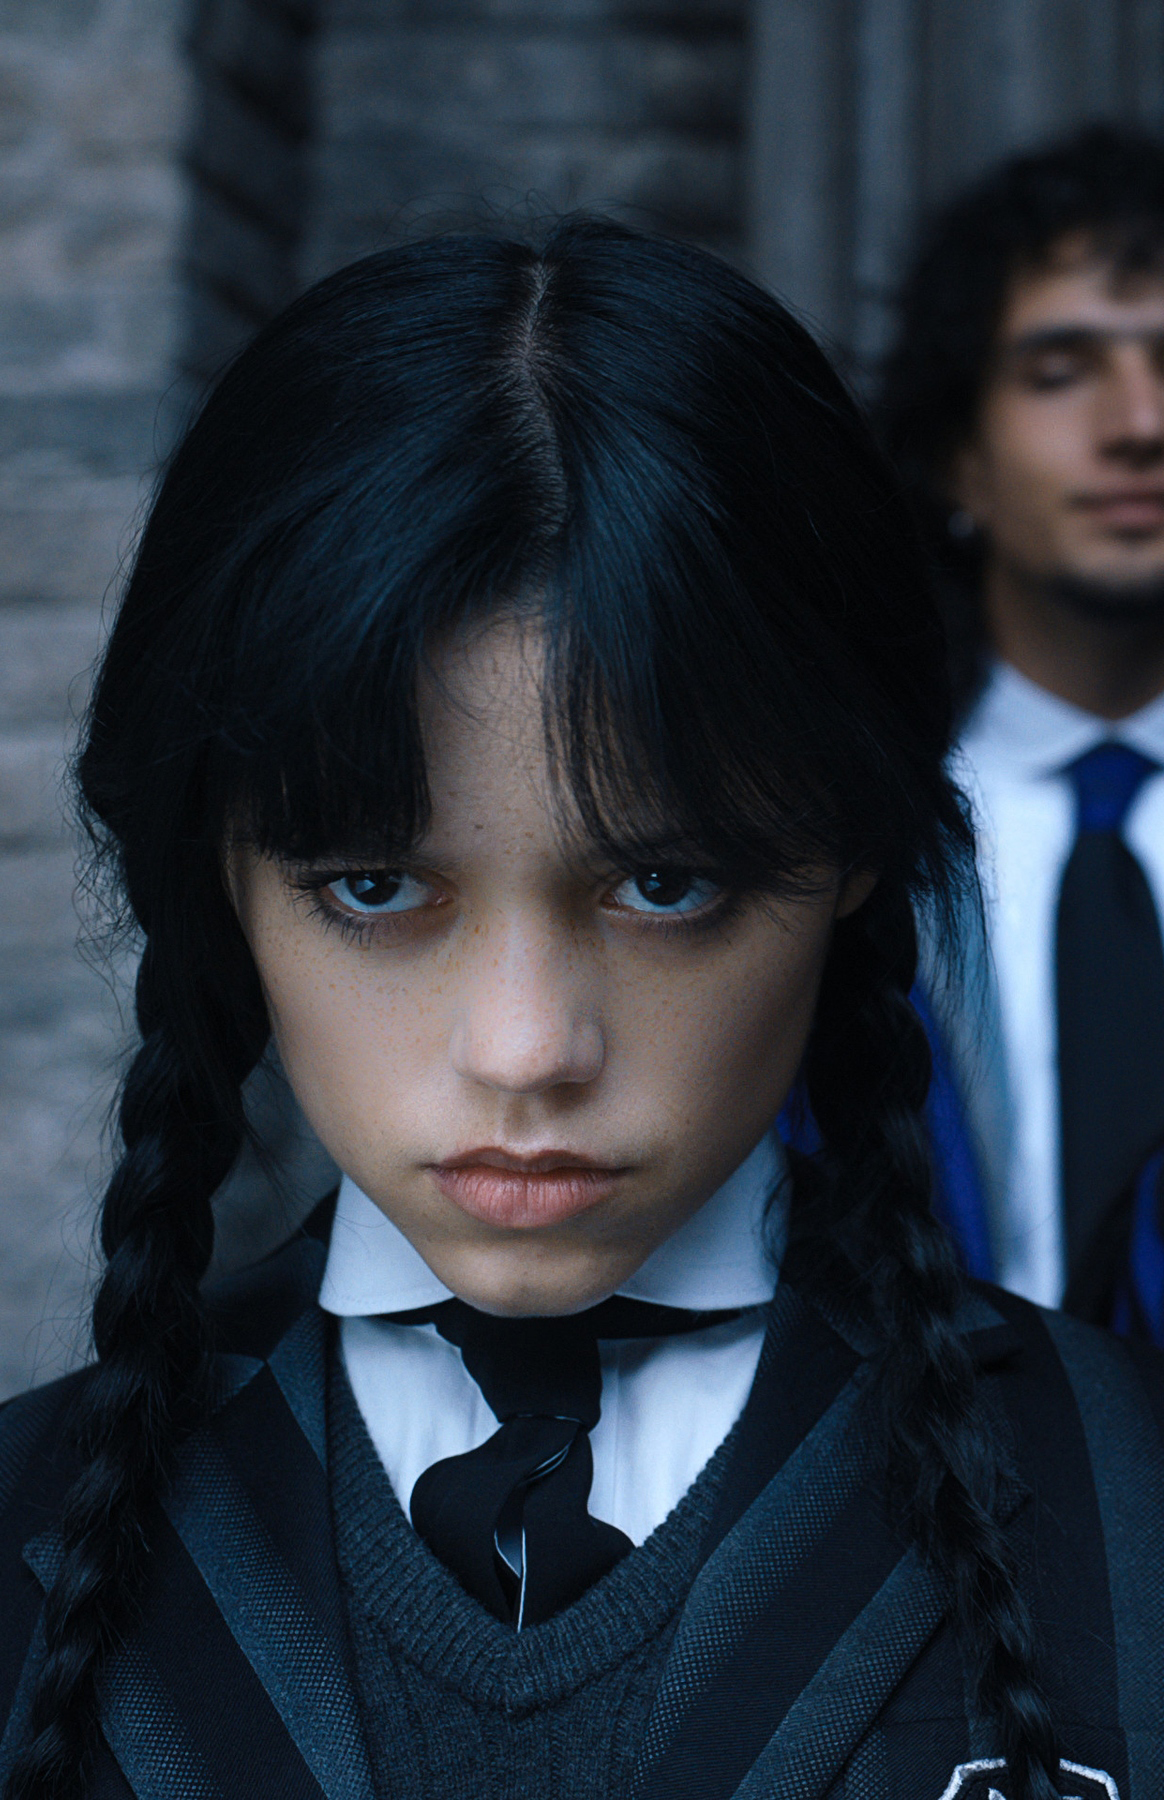 39008 The Addams Family 2 HD, Wednesday Addams - Rare Gallery HD Wallpapers